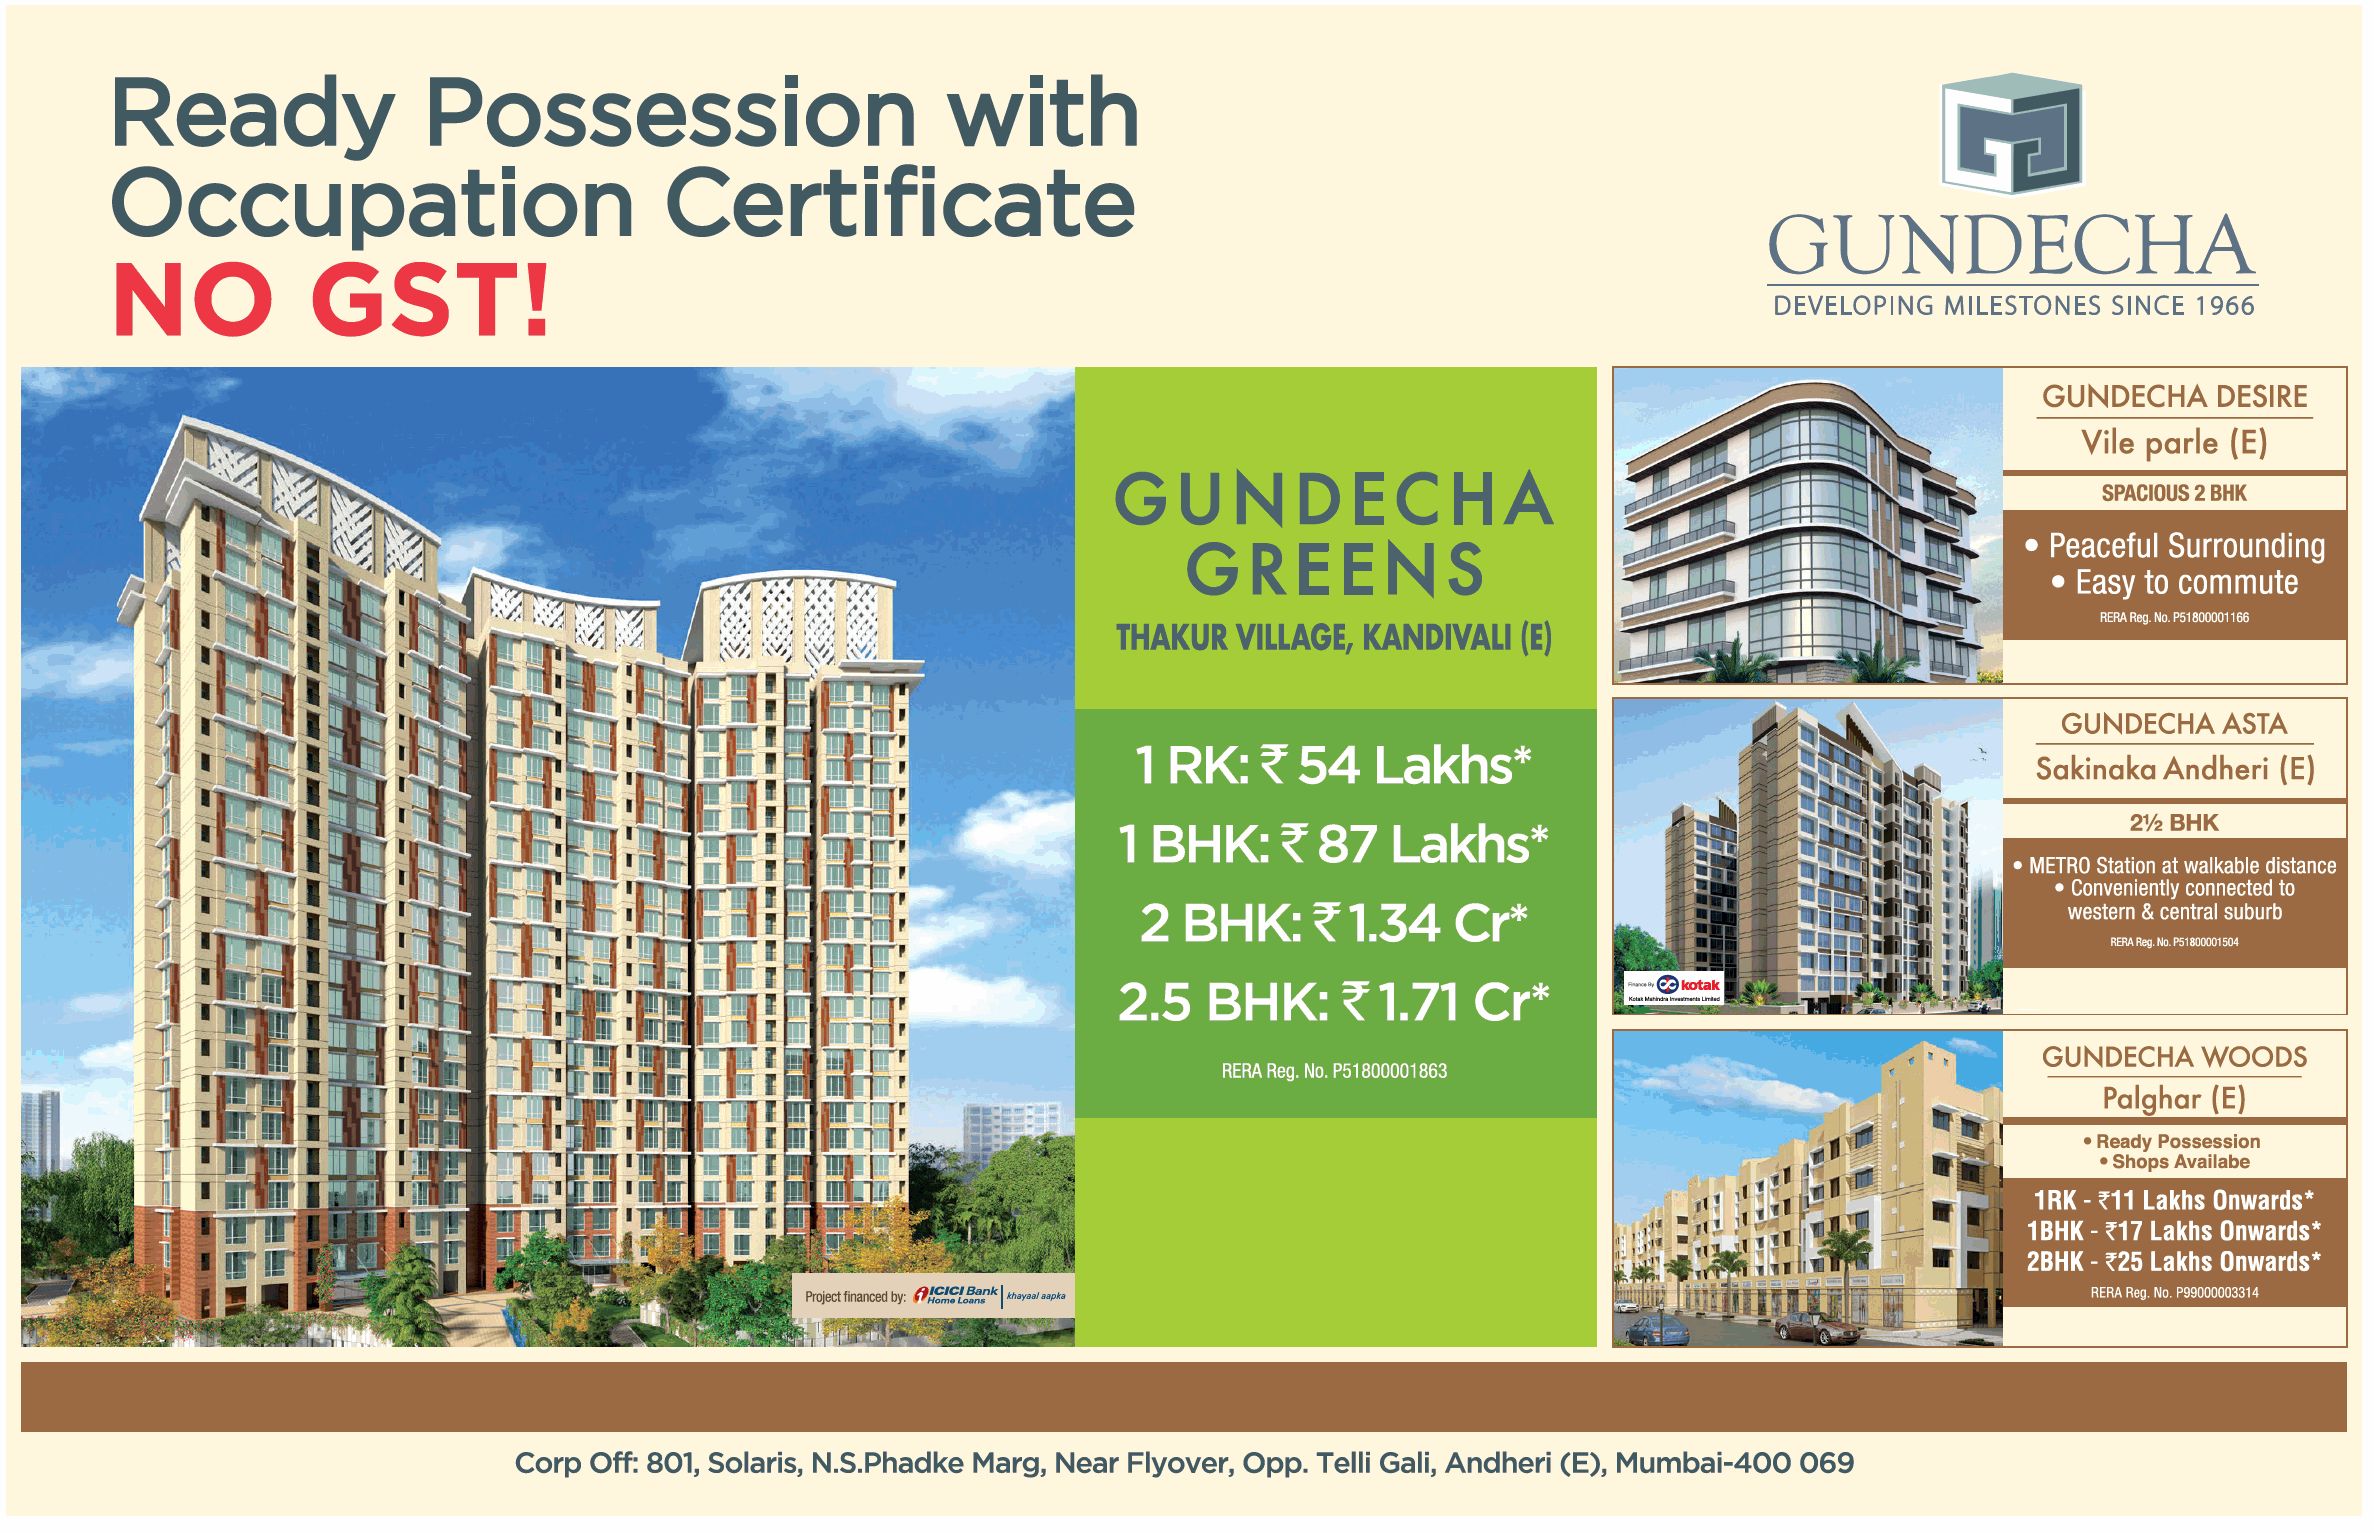 Ready possession with occupation certificate, No GST at Gundecha Group, Mumbai